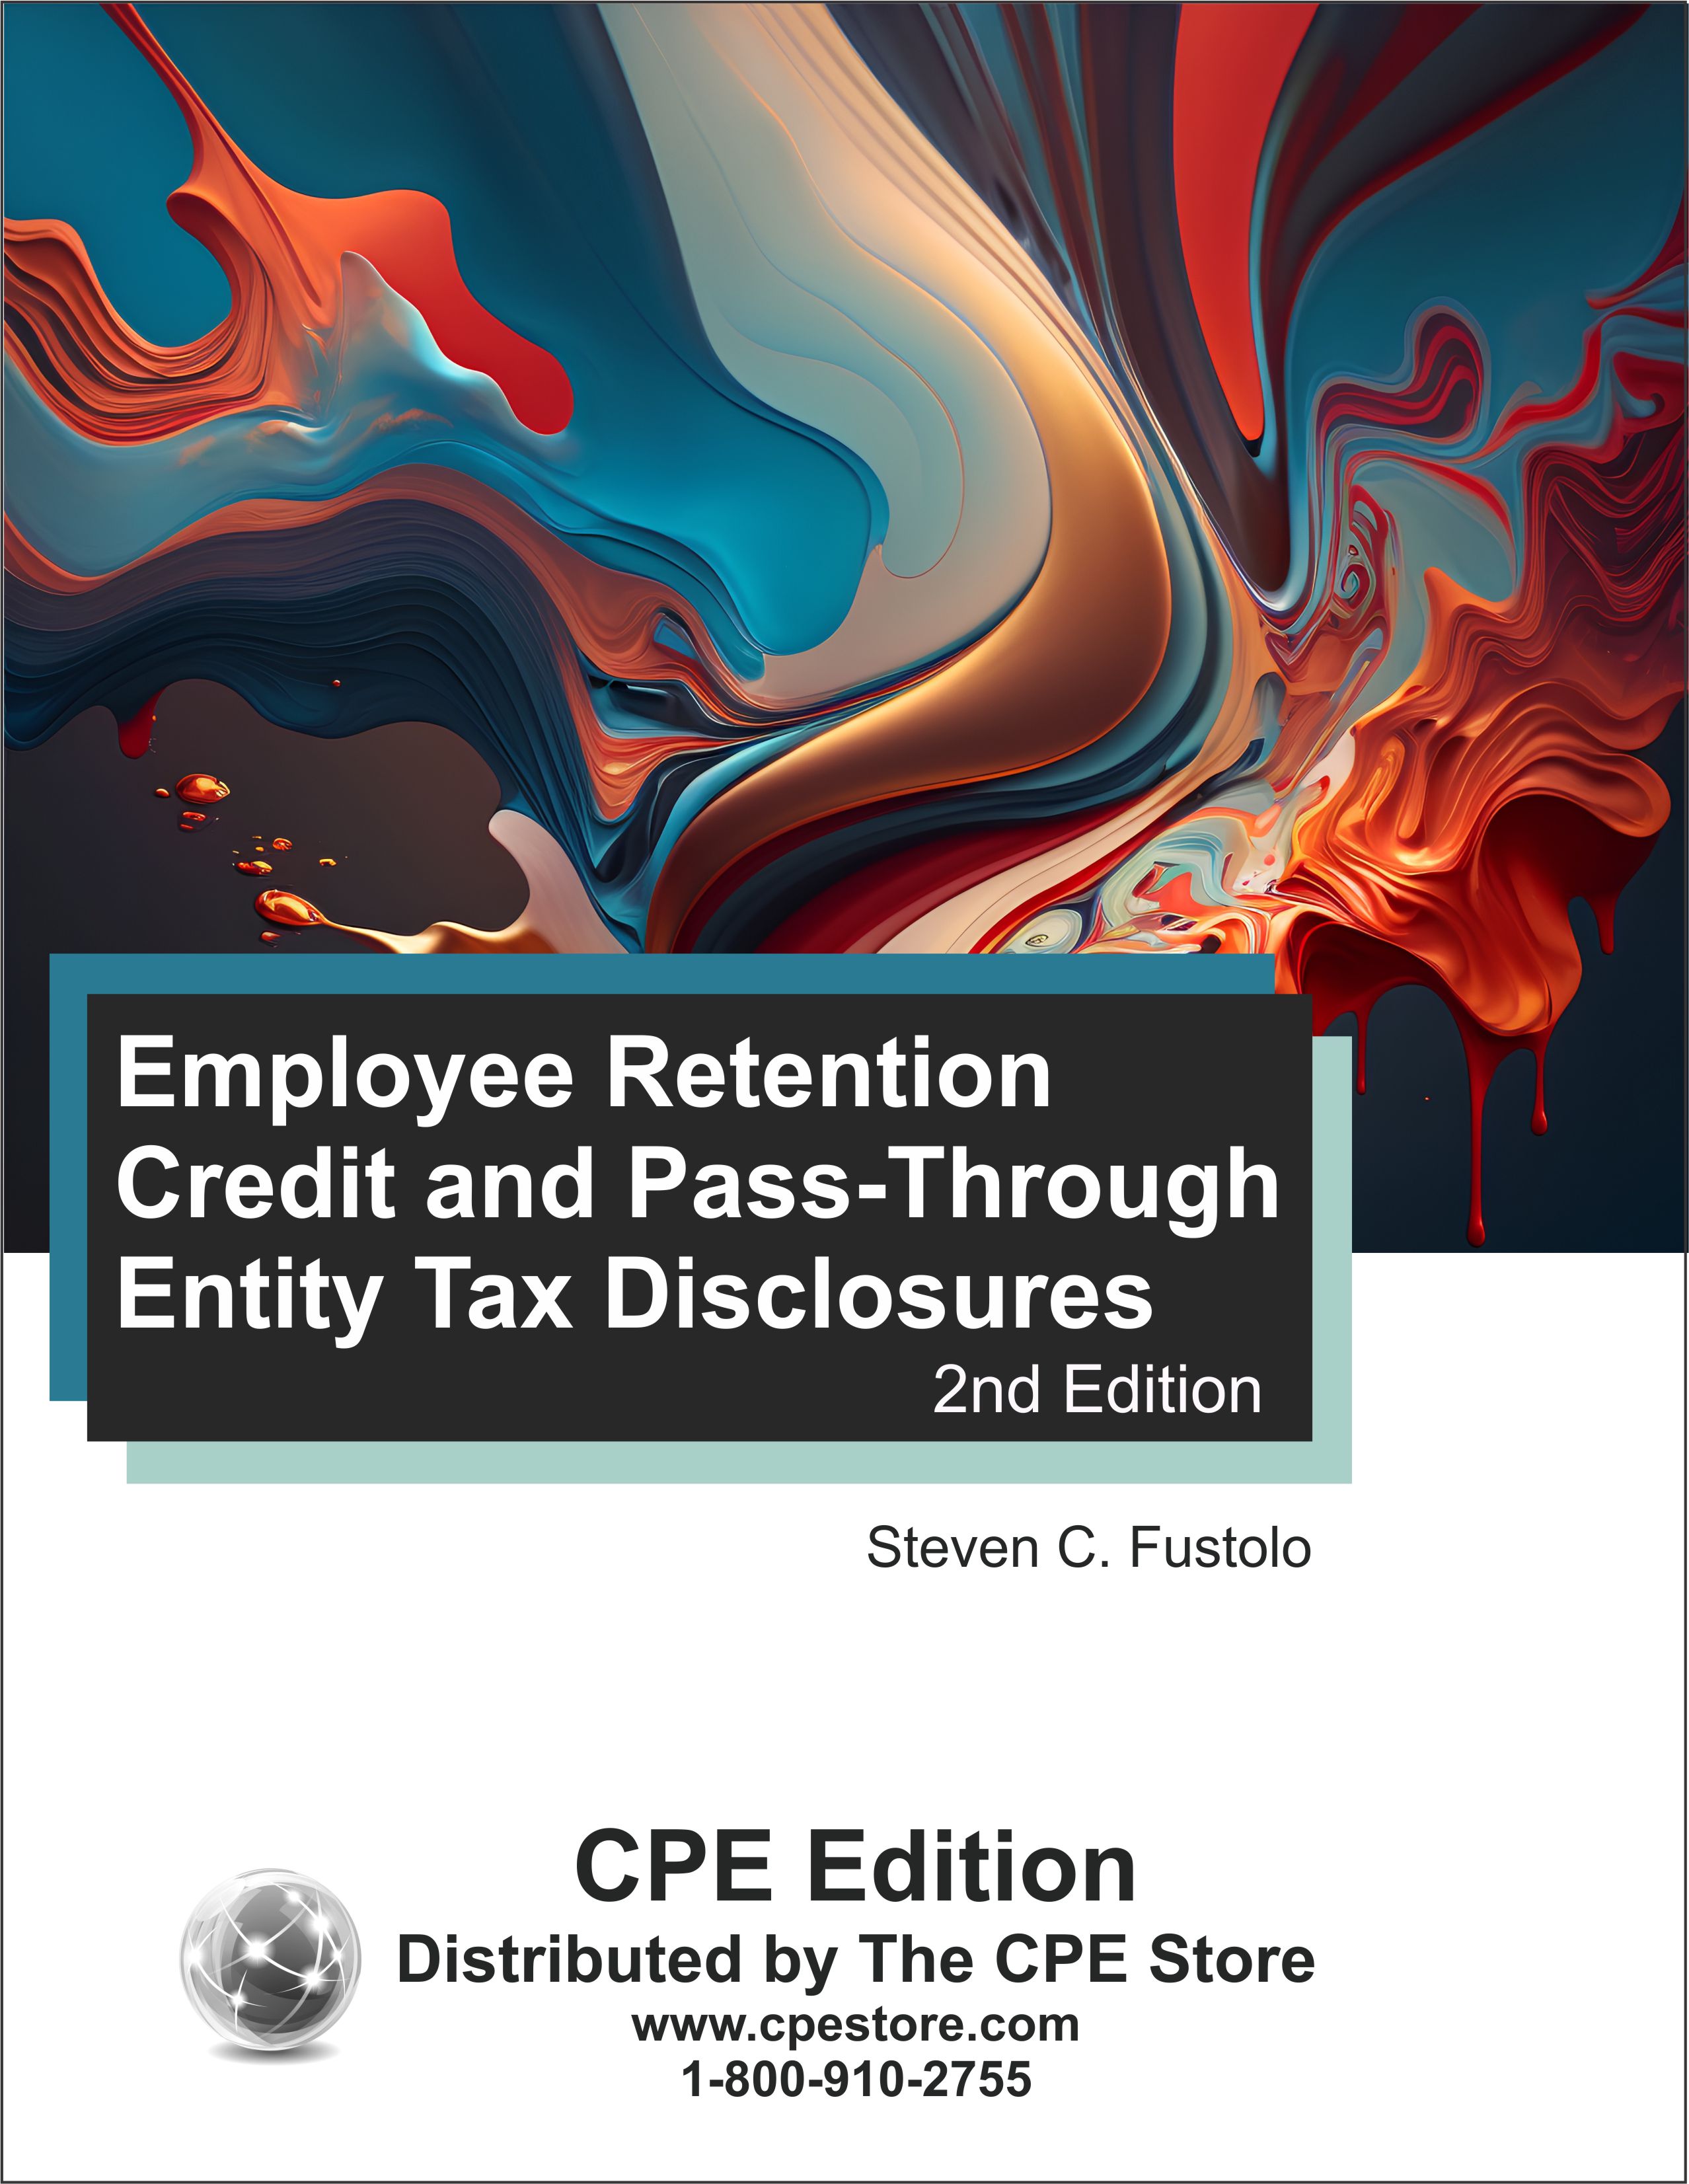 Employee Retention Credit & Pass-Through Entity Tax Disclosures